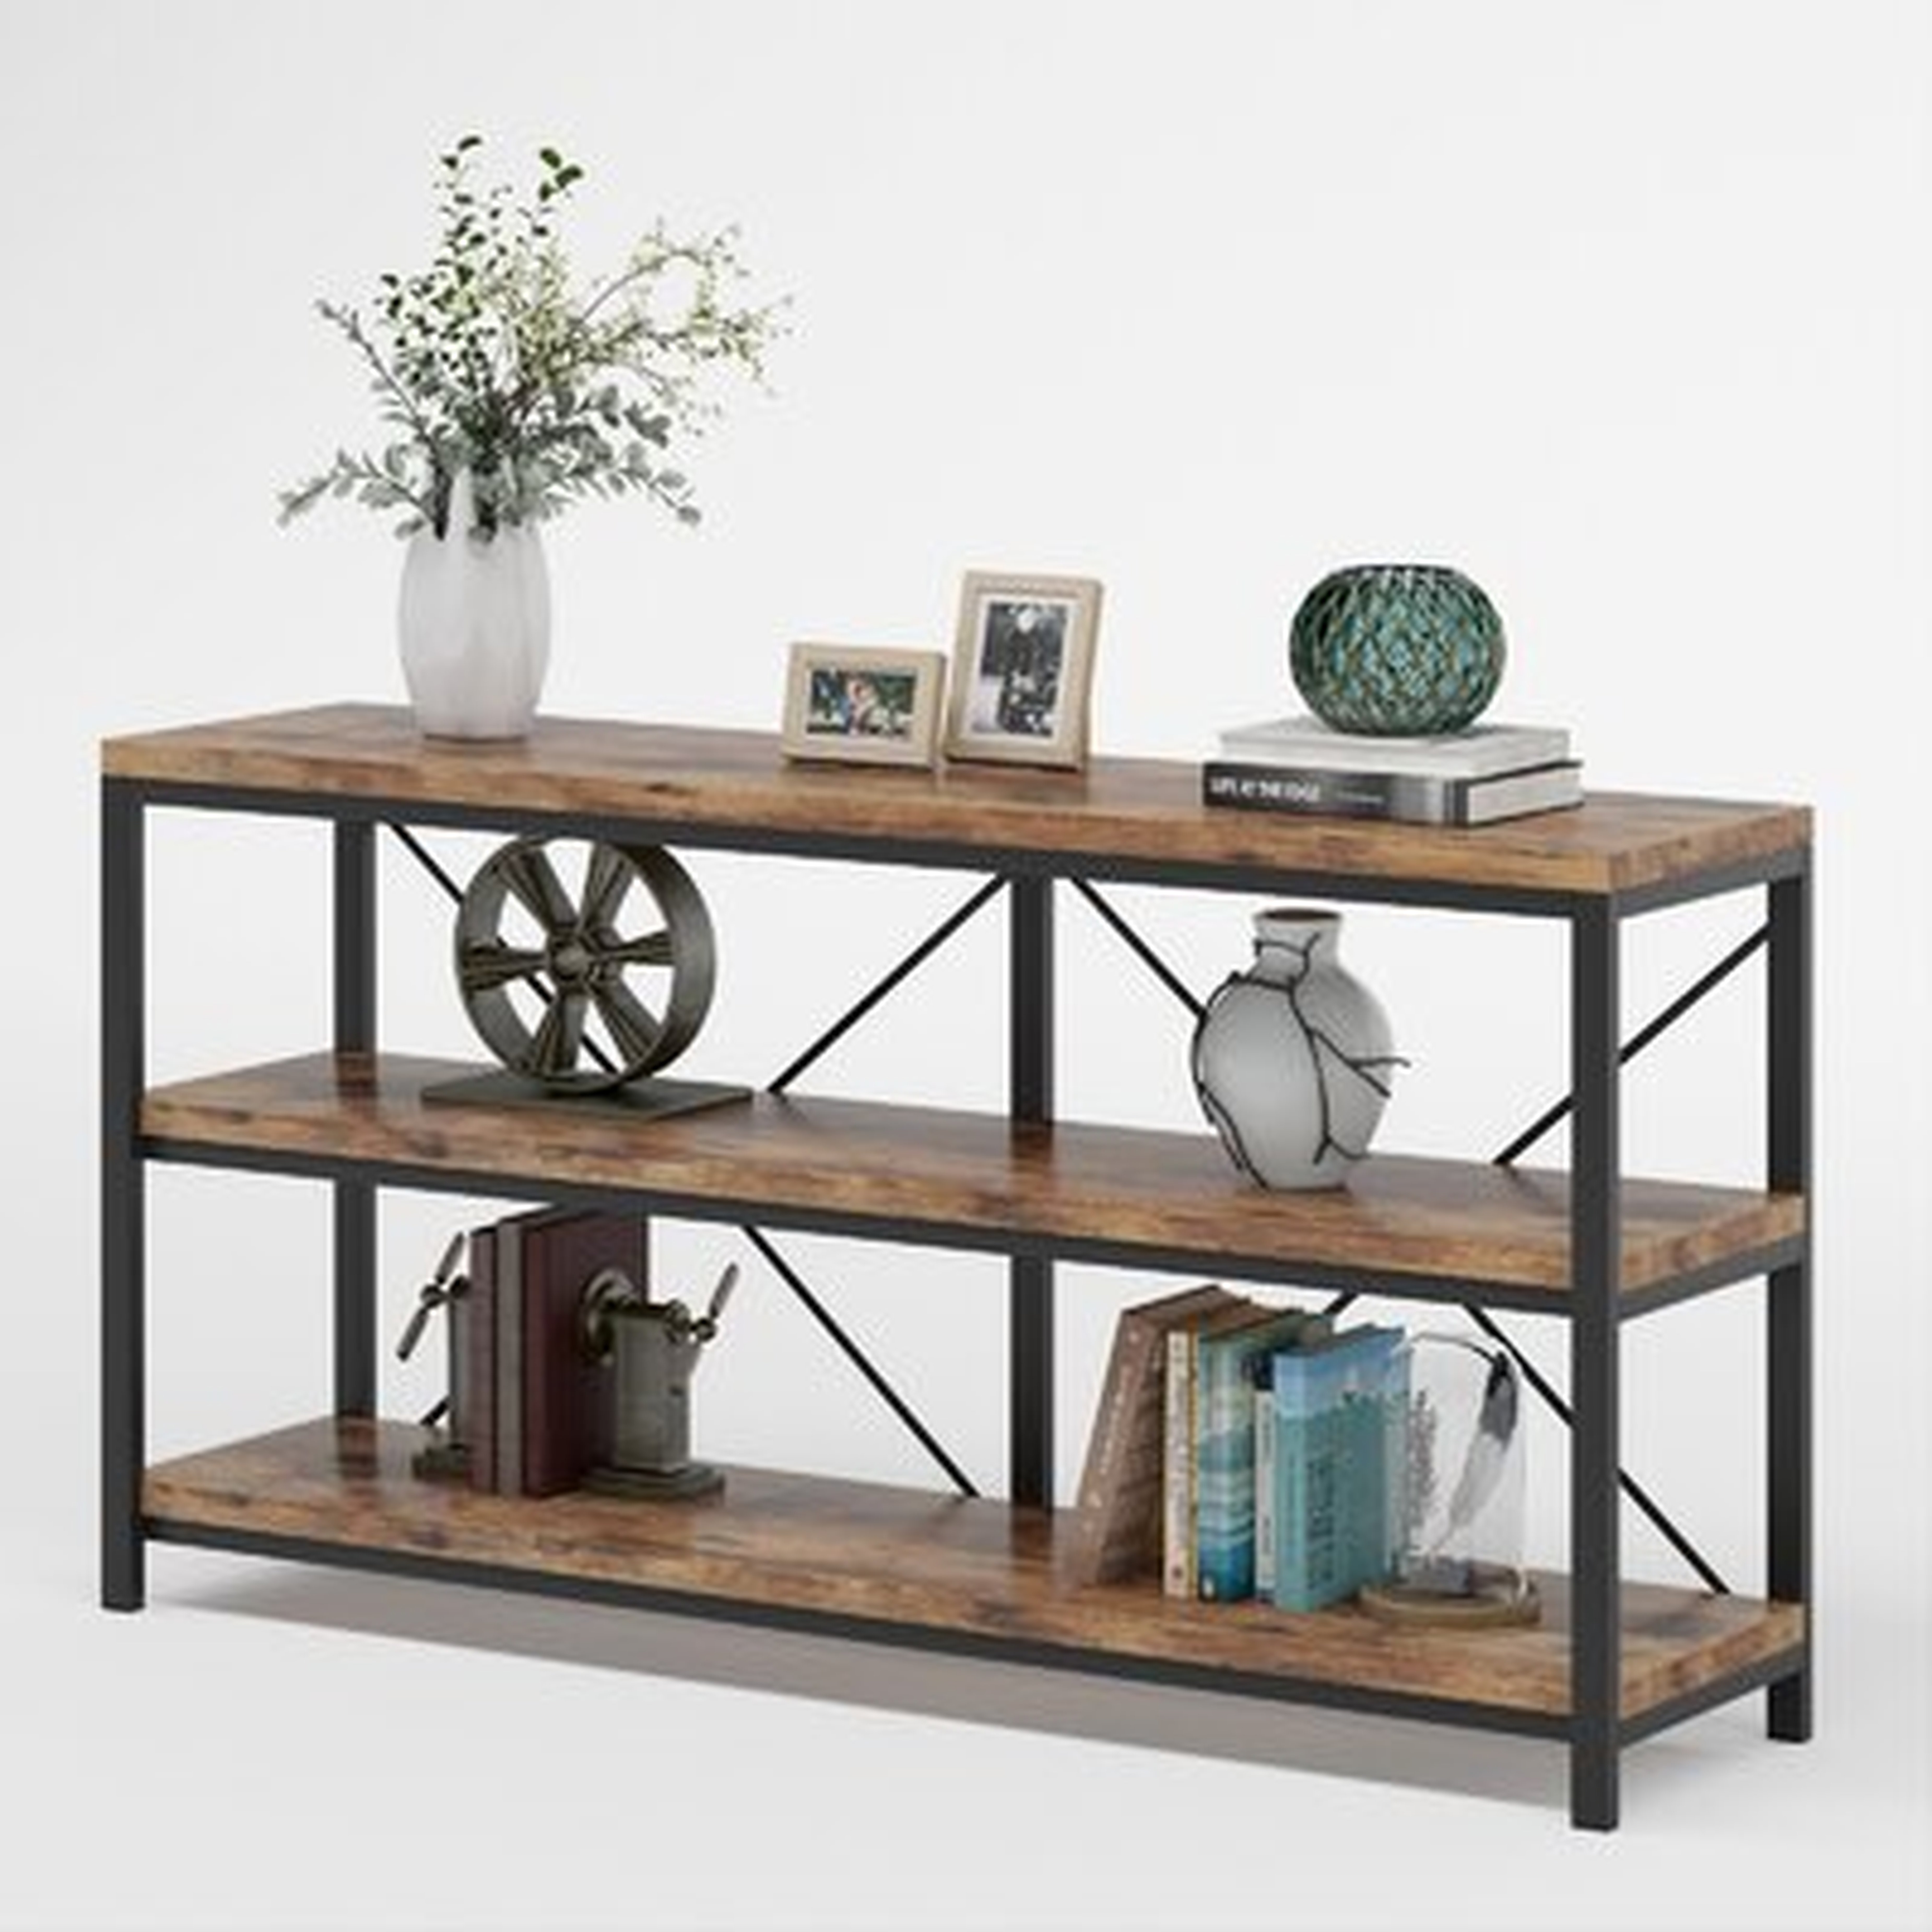 55" Console Table, TV Stand, Sofa Table With Storage Shelves - Wayfair